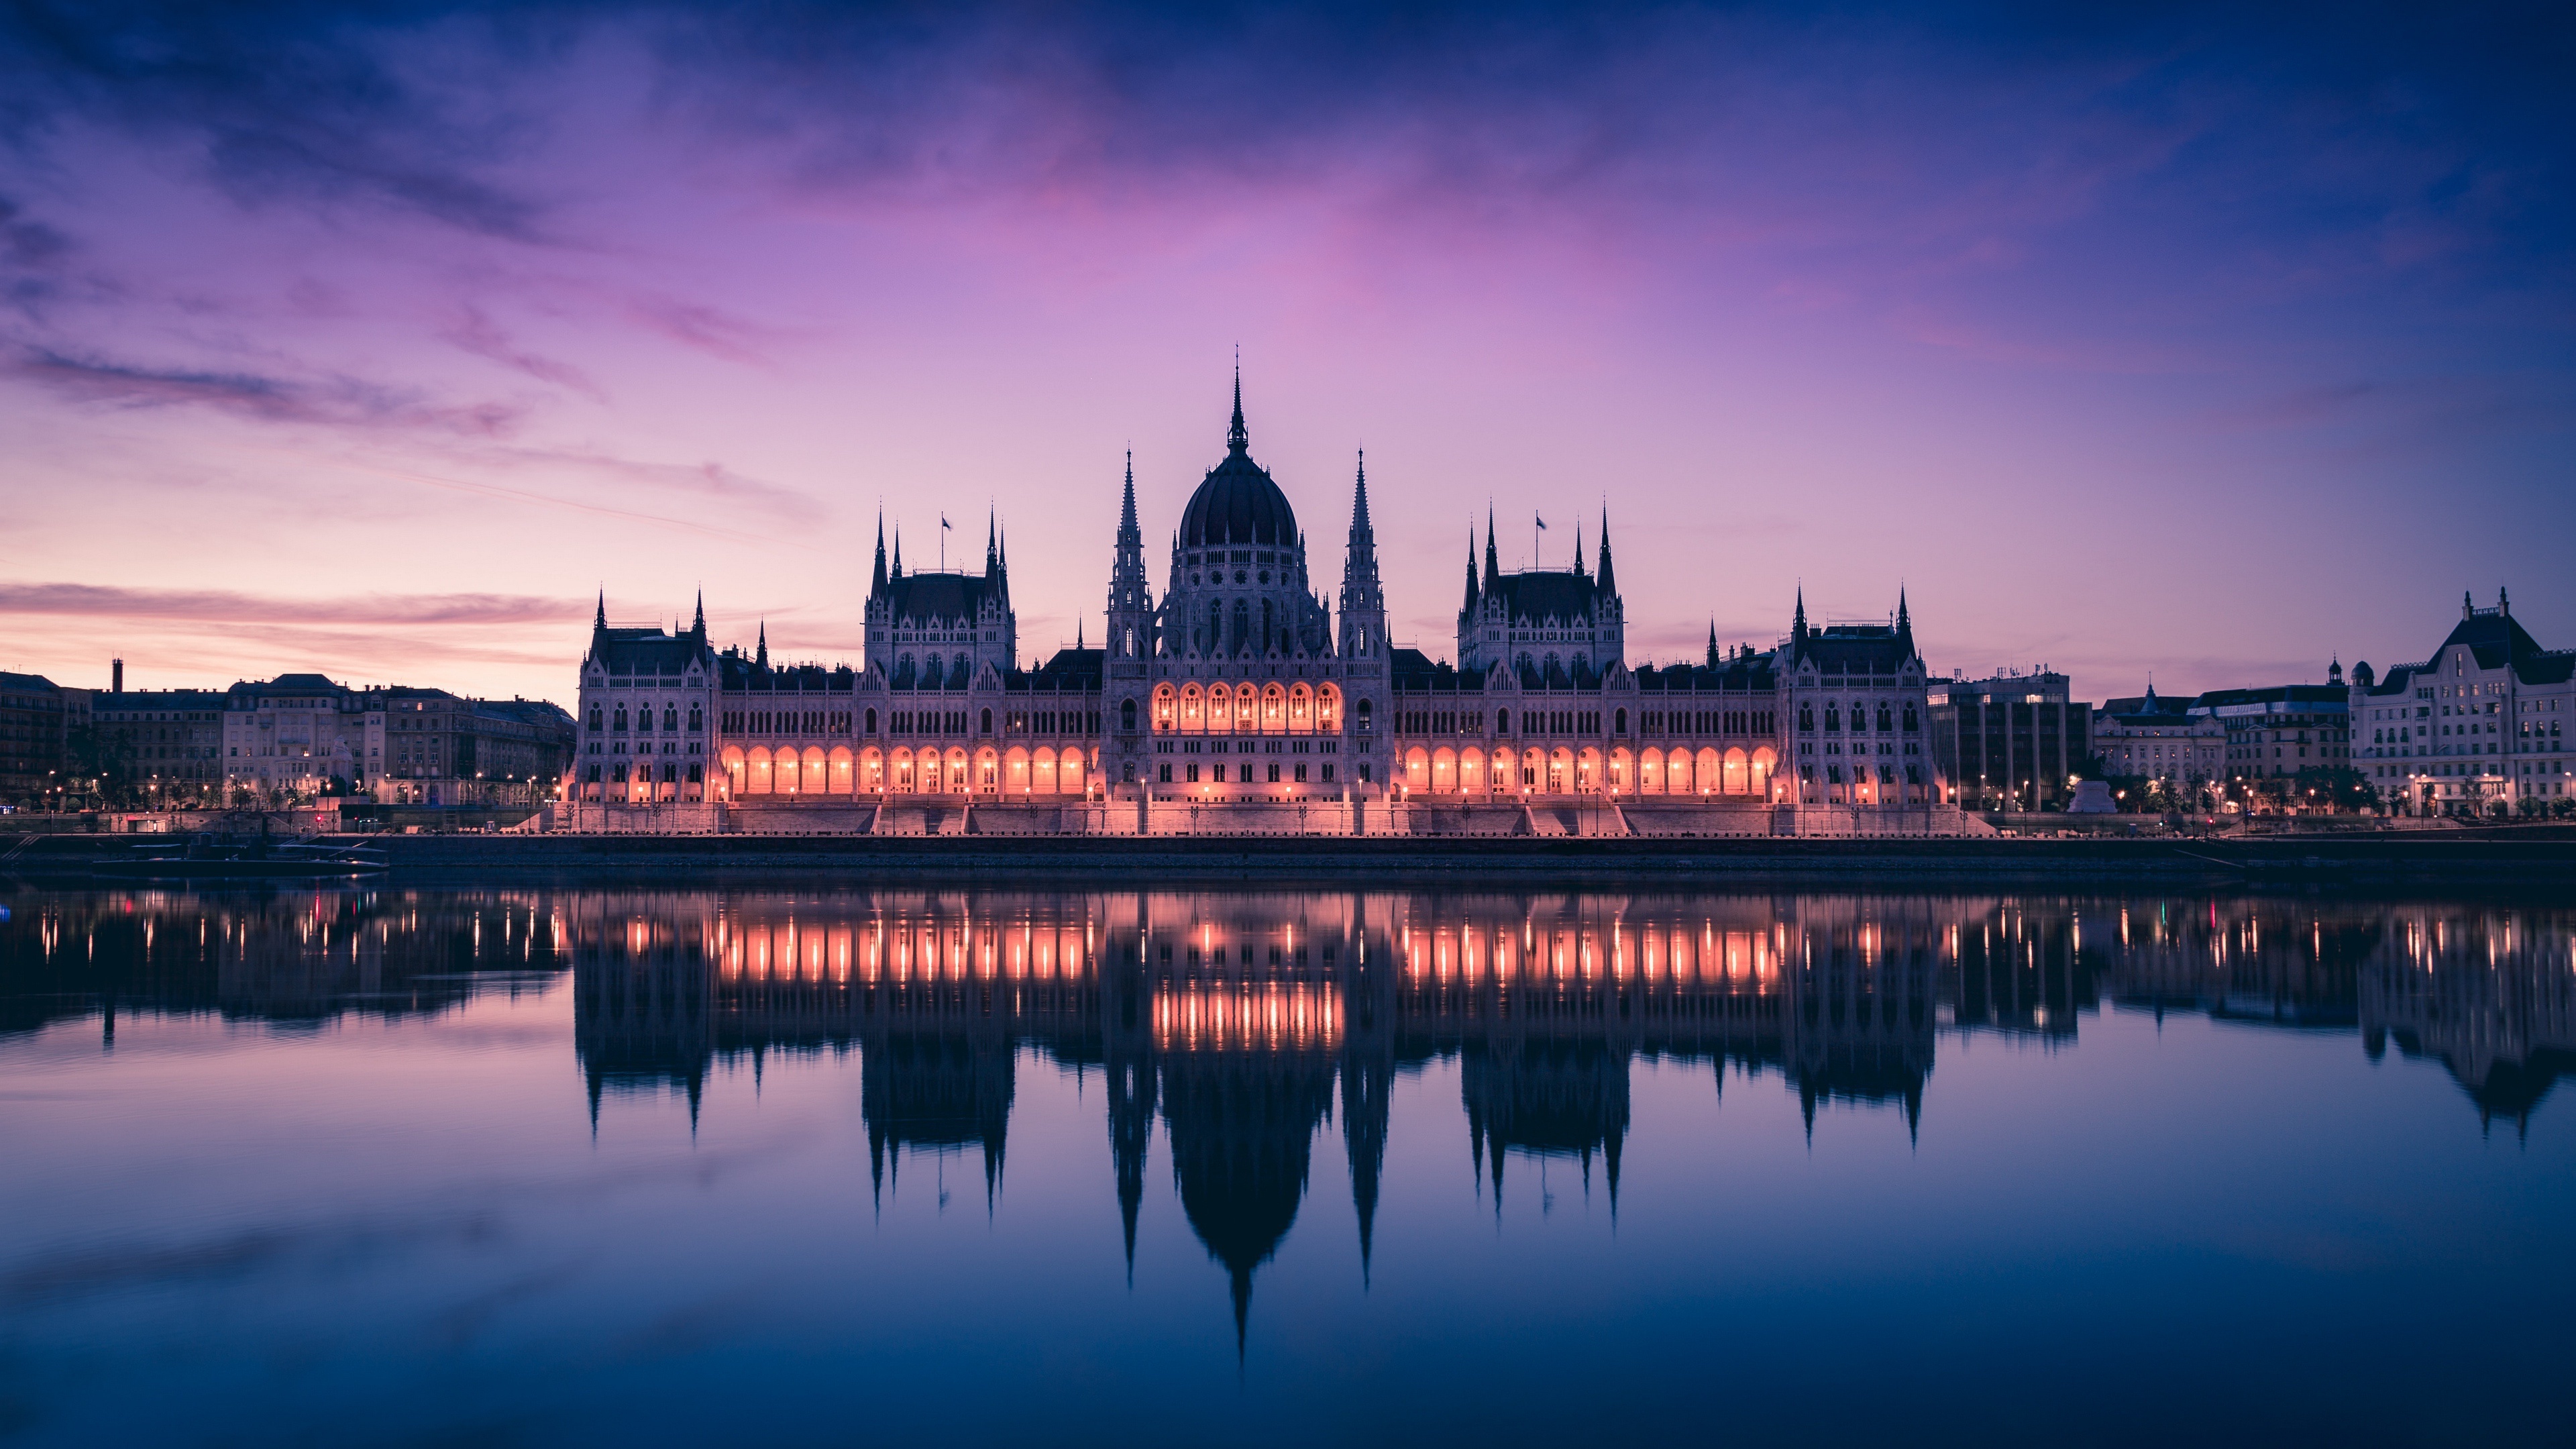 Budapest: Hungarian Parliament Building, Situated on Kossuth Square in the Pest side of the city. 3840x2160 4K Wallpaper.